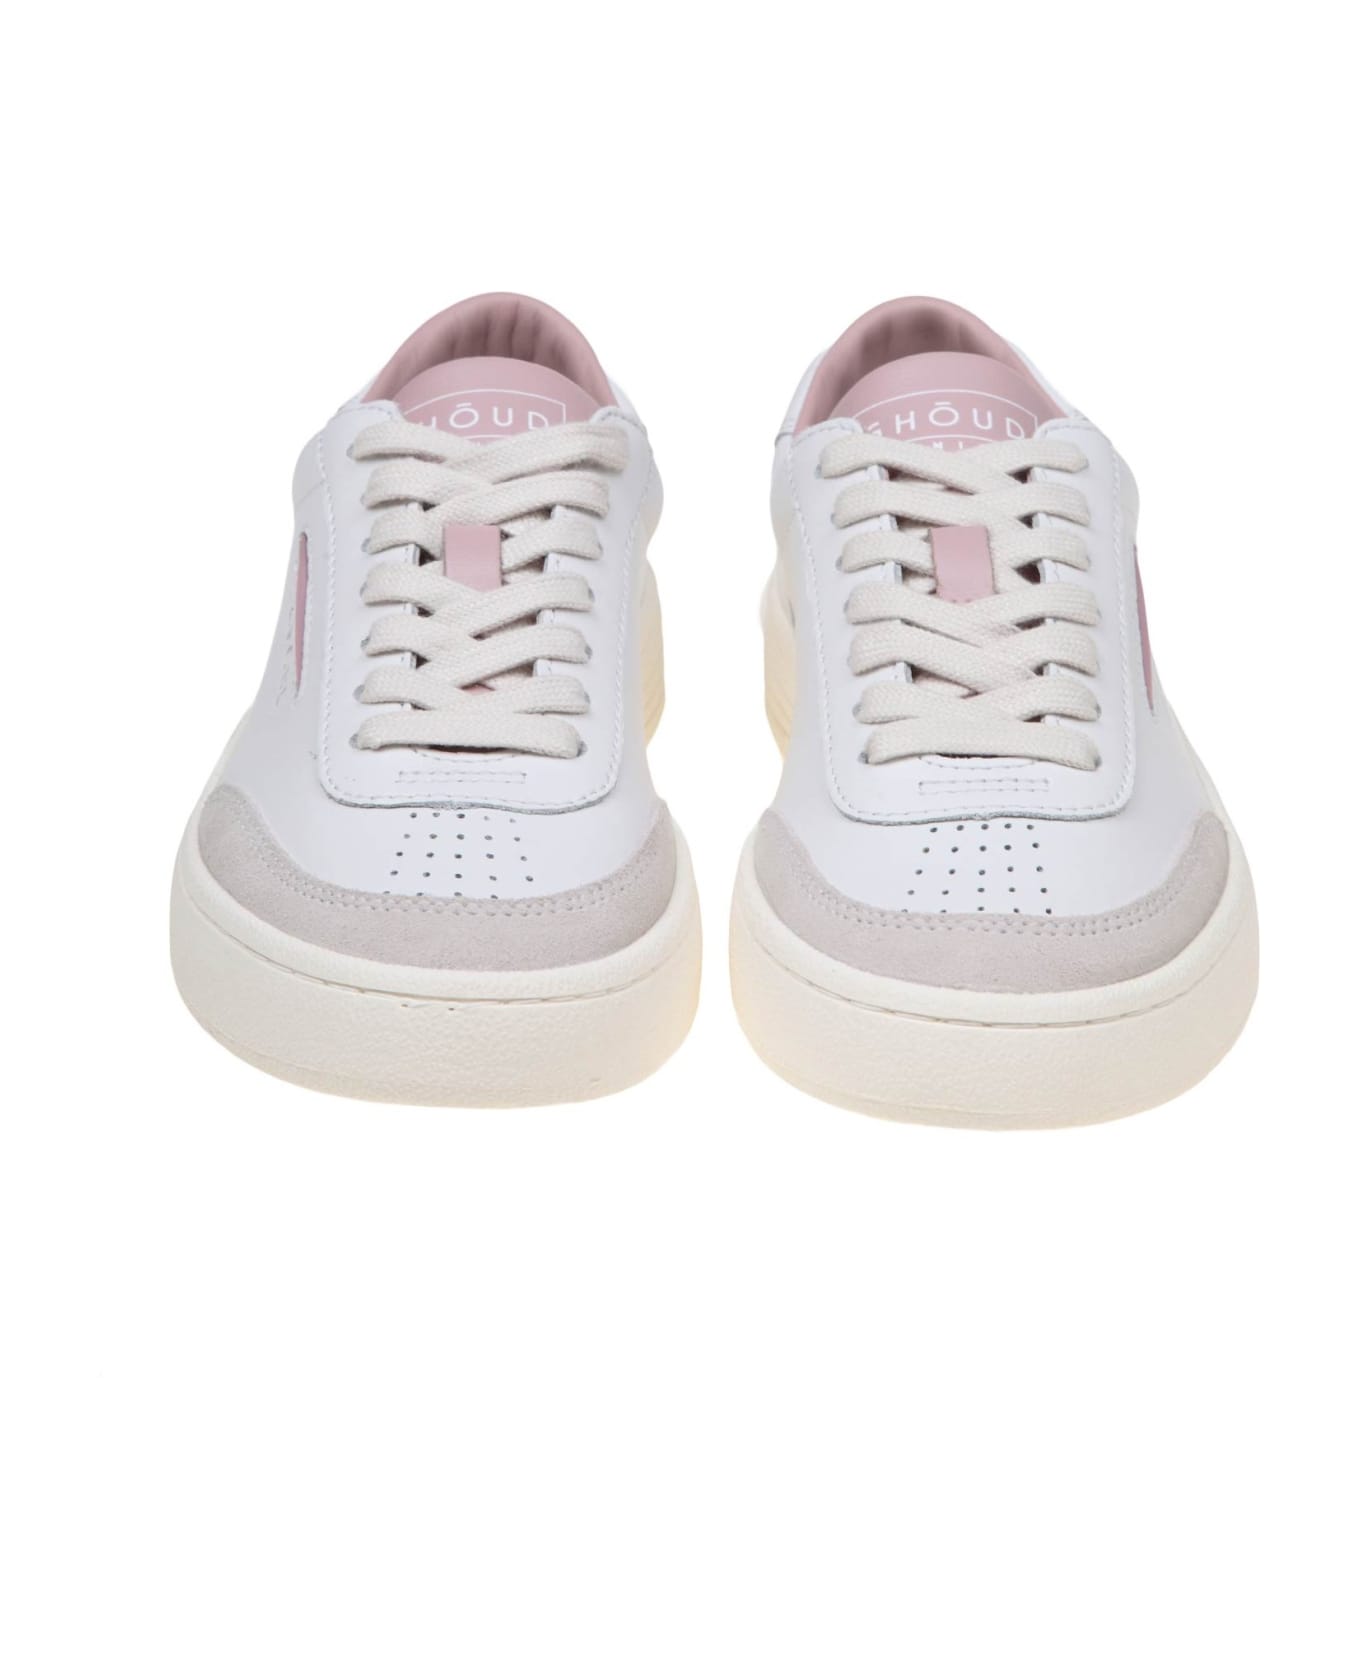 GHOUD Lido Low Sneakers In White/pink Leather And Suede - LEAT/SUEDE WHT/PINK